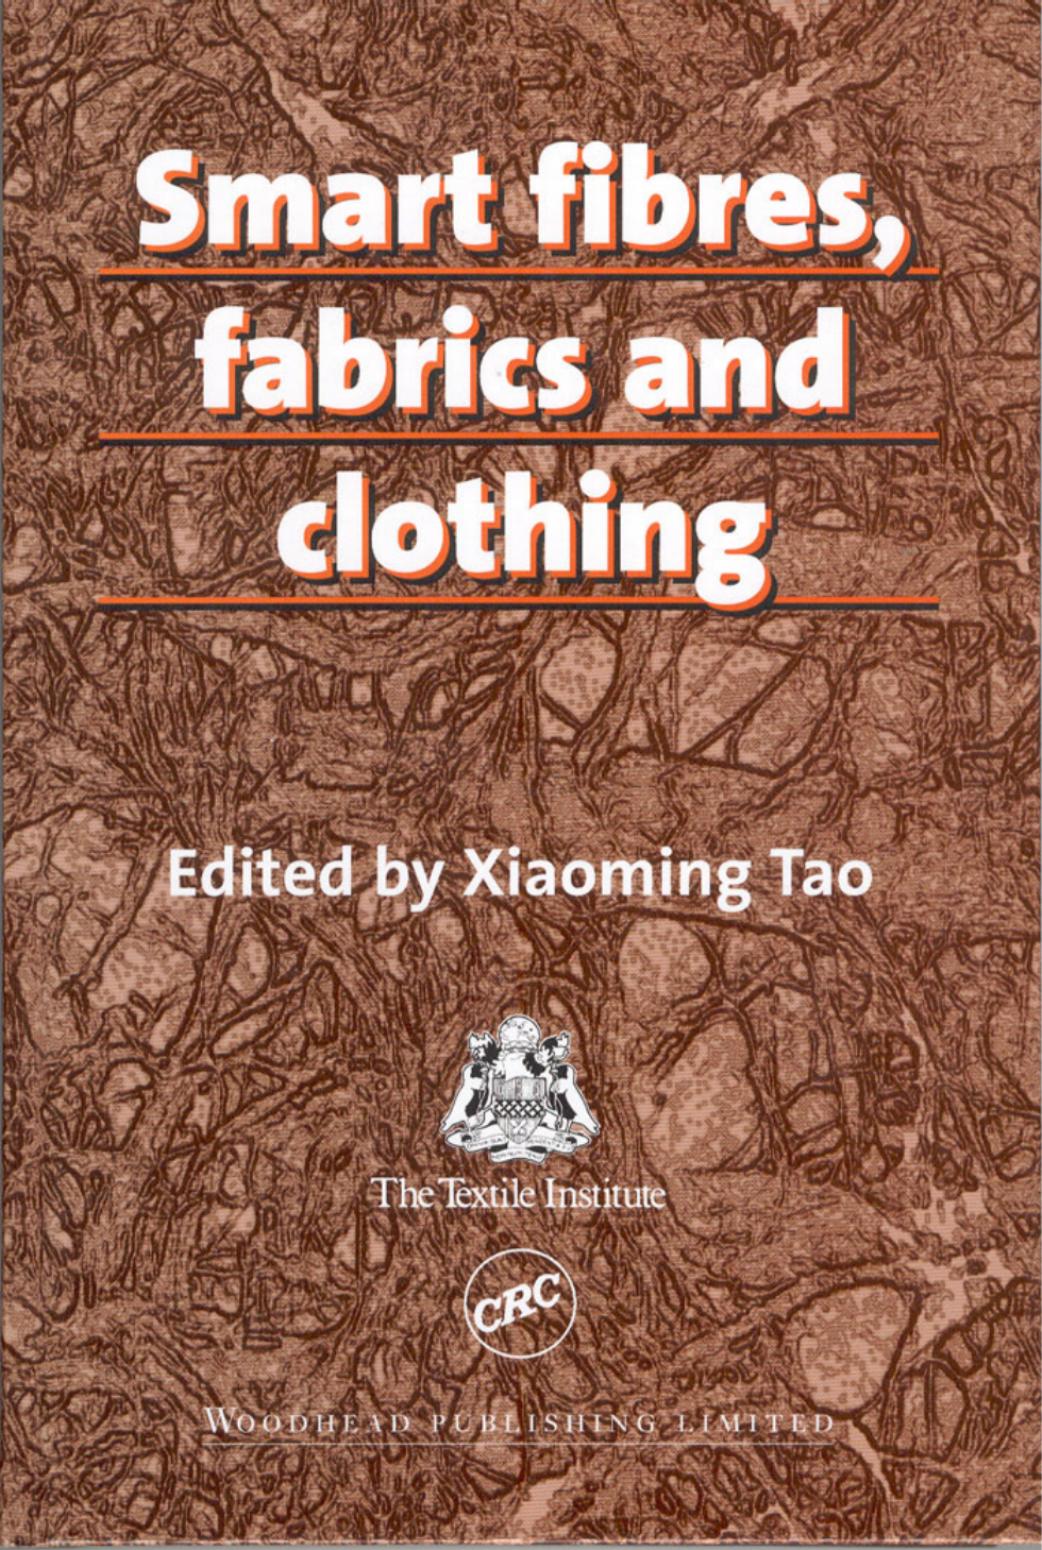 Smart Fibres, Fabrics and Clothing (Woodhead Publishing Series in Textiles) 2001